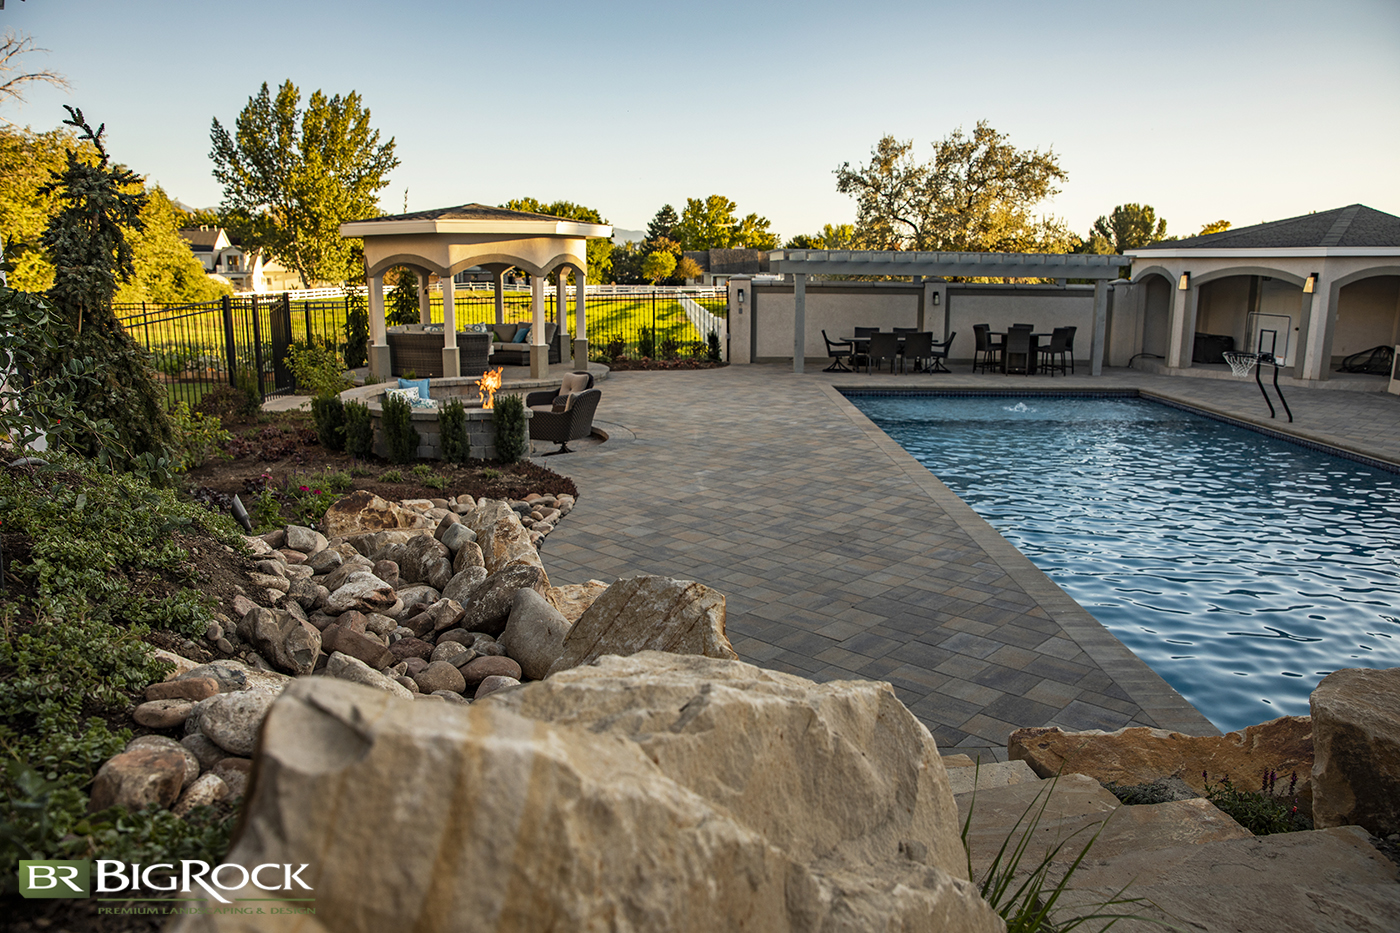 Adding recreation to your backyard landscaping design doesn't have to be ugly and the focal point. Hide your pool slide among natural rock and stairs for a natural design.